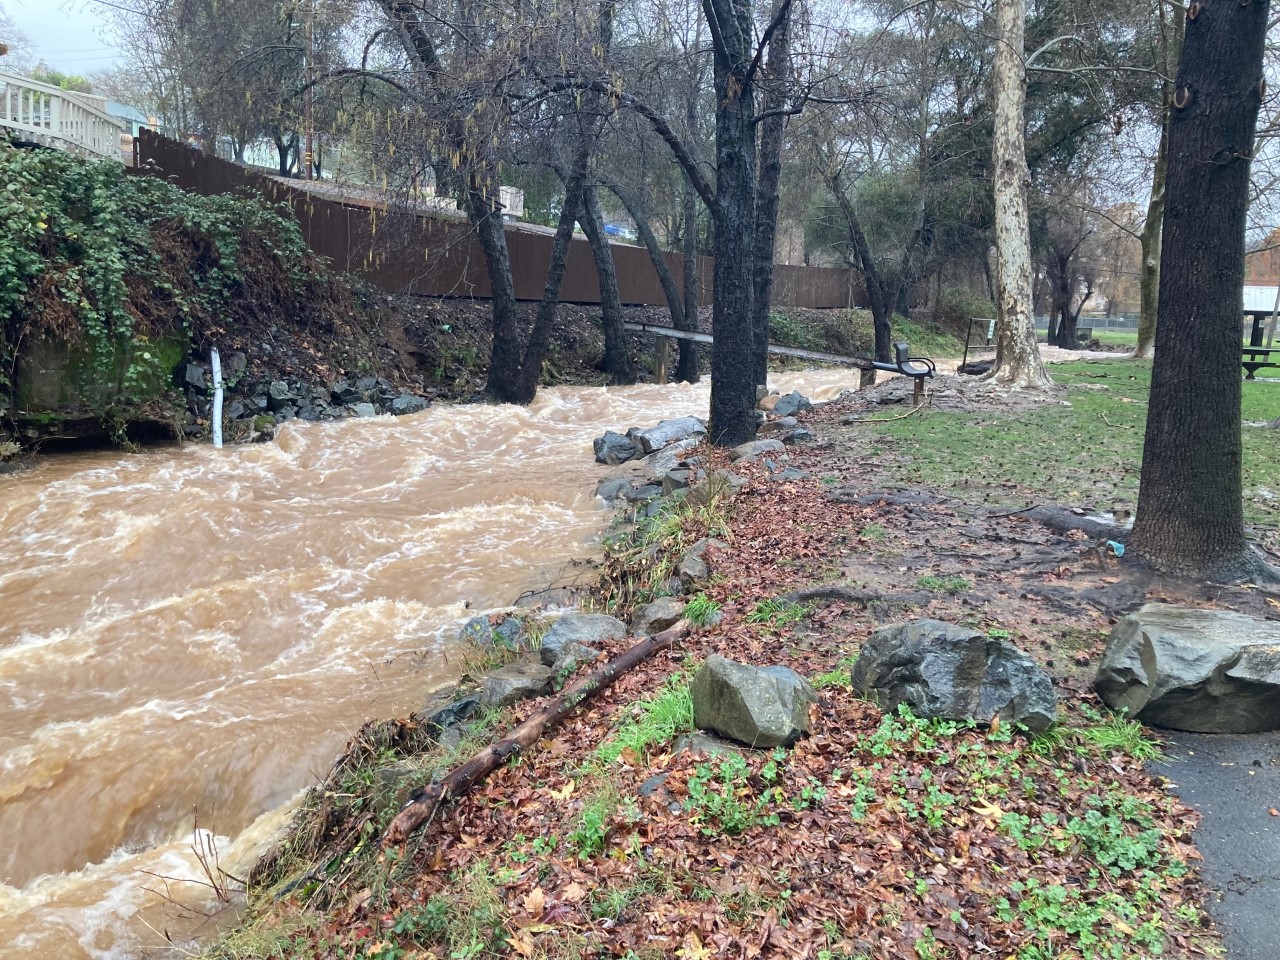 Water along Woods Creek In Sonora (1/9/23 at 11:30am)